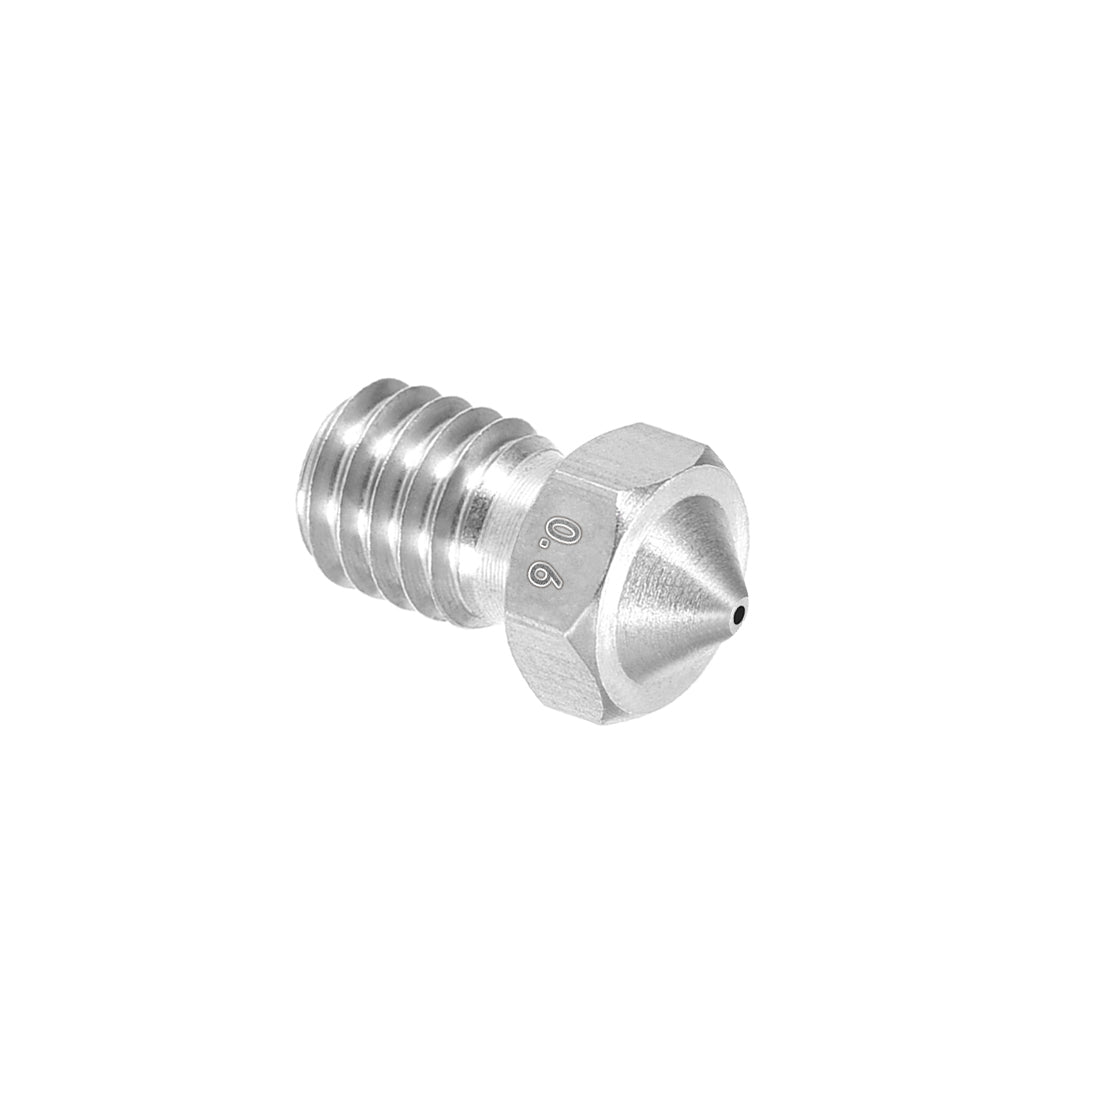 uxcell Uxcell 0.6mm 3D Printer Nozzle, Fit for V6, for 1.75mm Filament Stainless Steel 1pcs